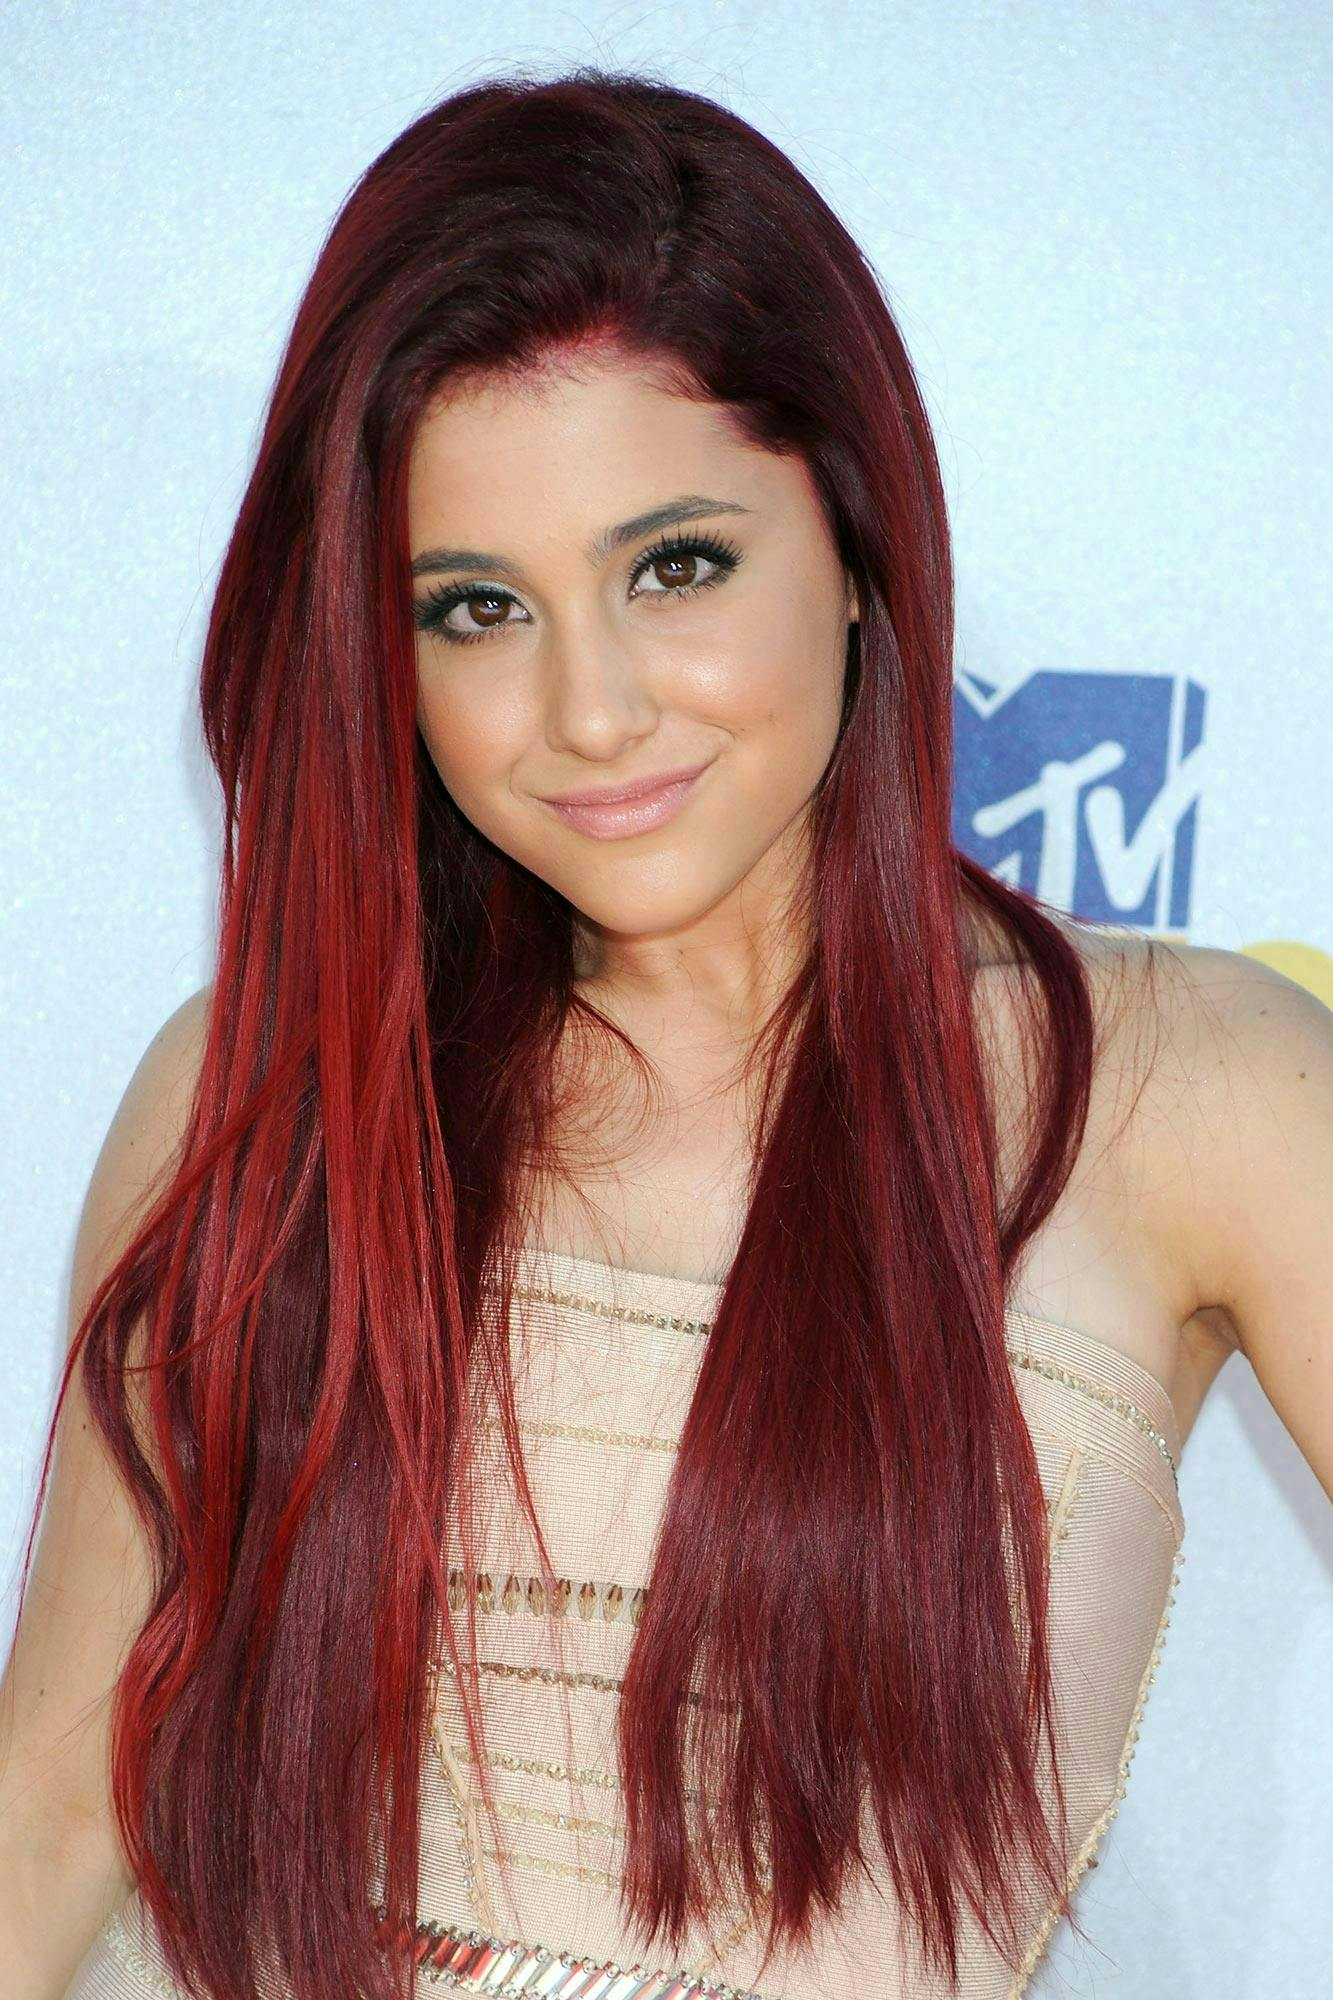 Ariana Grande with bright red hair.